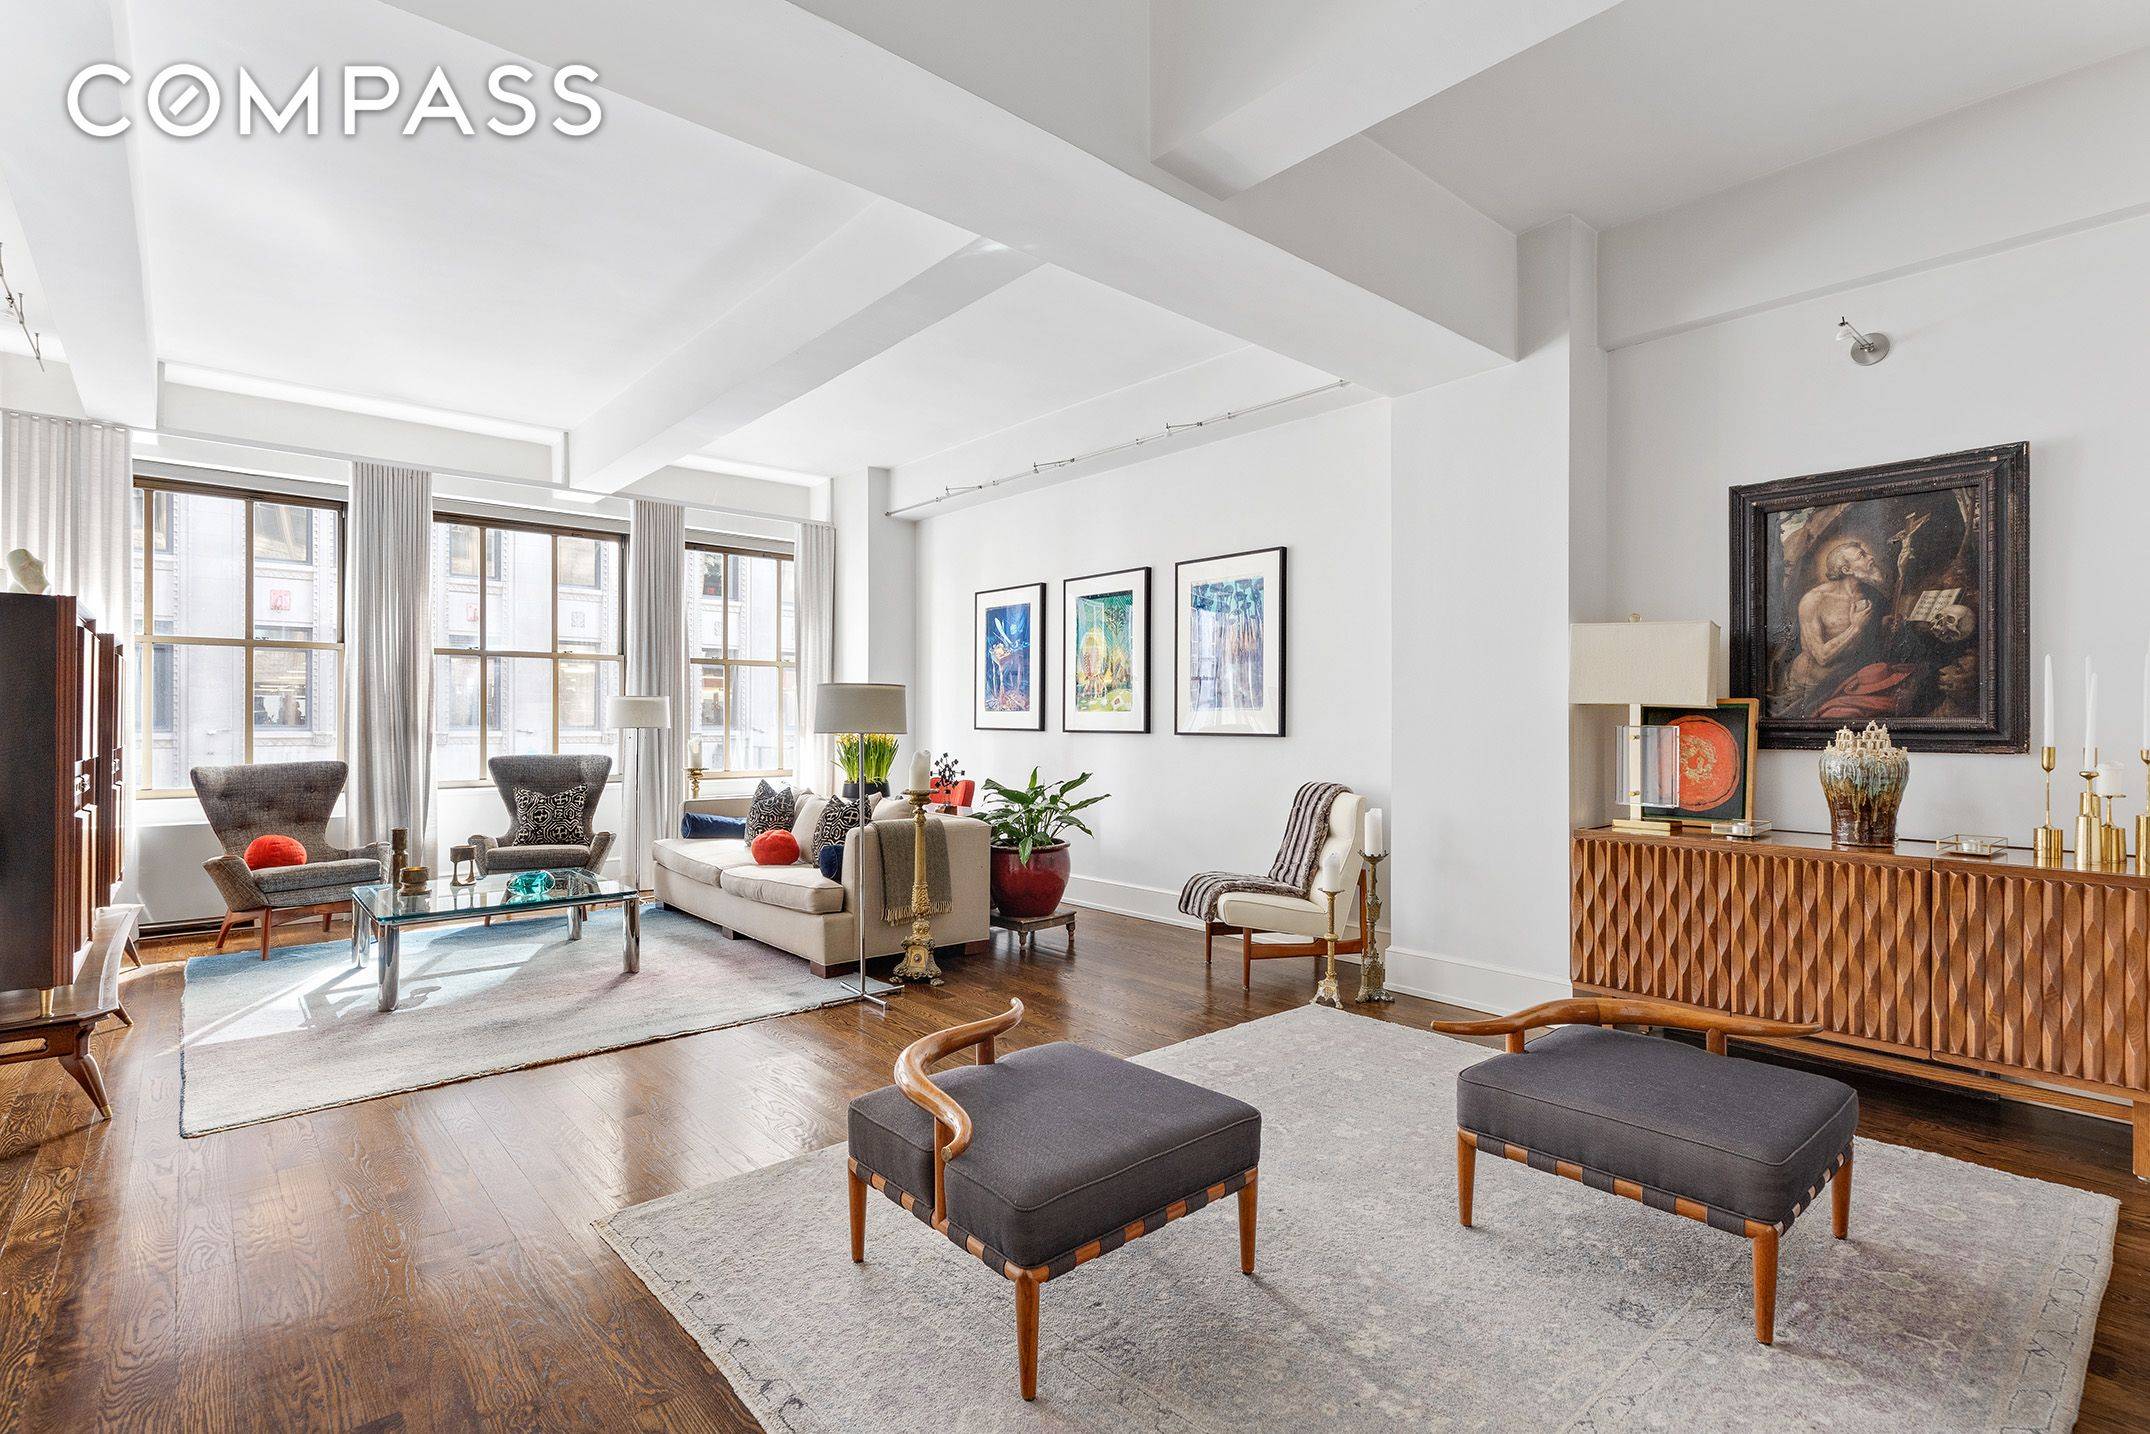 Introducing a stunning loft apartment located at 130 W 30th St in lively Chelsea.